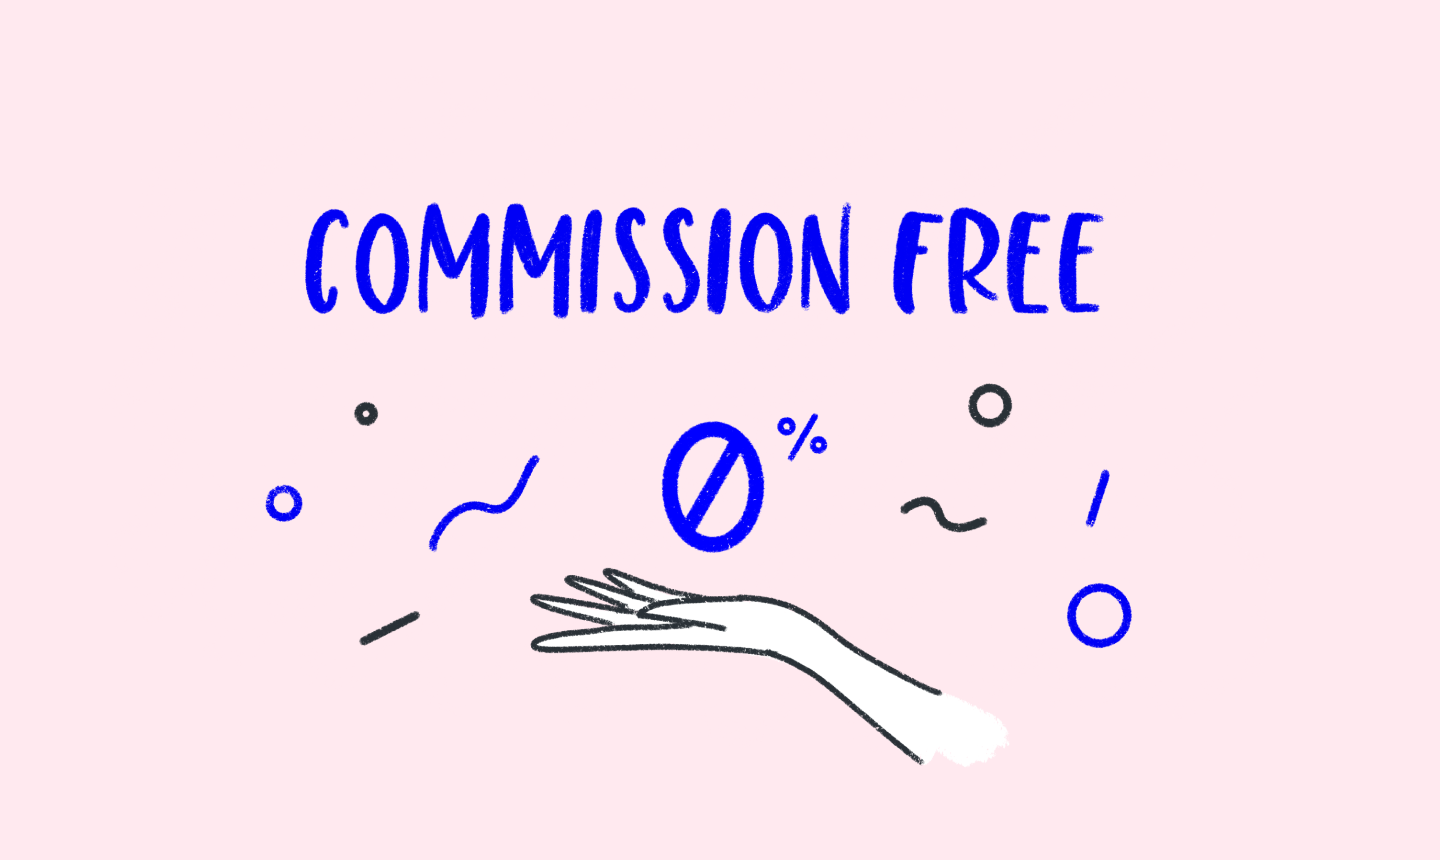 Commission-free investing